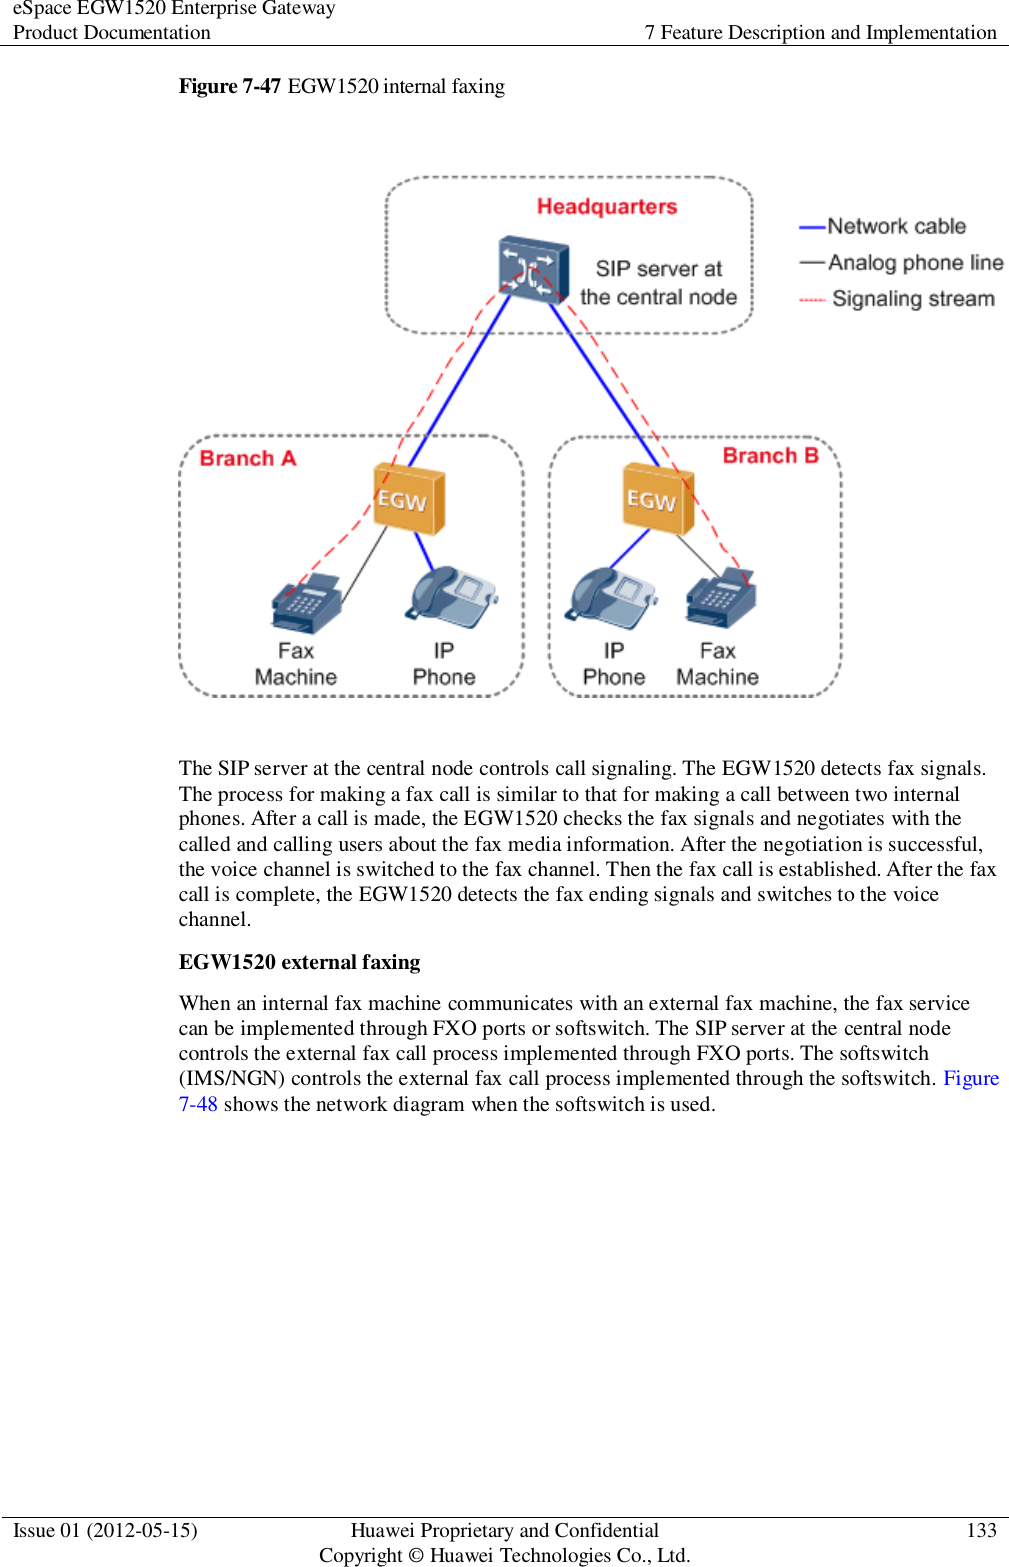 eSpace EGW1520 Enterprise Gateway Product Documentation 7 Feature Description and Implementation  Issue 01 (2012-05-15) Huawei Proprietary and Confidential                                     Copyright © Huawei Technologies Co., Ltd. 133  Figure 7-47 EGW1520 internal faxing   The SIP server at the central node controls call signaling. The EGW1520 detects fax signals. The process for making a fax call is similar to that for making a call between two internal phones. After a call is made, the EGW1520 checks the fax signals and negotiates with the called and calling users about the fax media information. After the negotiation is successful, the voice channel is switched to the fax channel. Then the fax call is established. After the fax call is complete, the EGW1520 detects the fax ending signals and switches to the voice channel. EGW1520 external faxing When an internal fax machine communicates with an external fax machine, the fax service can be implemented through FXO ports or softswitch. The SIP server at the central node controls the external fax call process implemented through FXO ports. The softswitch (IMS/NGN) controls the external fax call process implemented through the softswitch. Figure 7-48 shows the network diagram when the softswitch is used. 